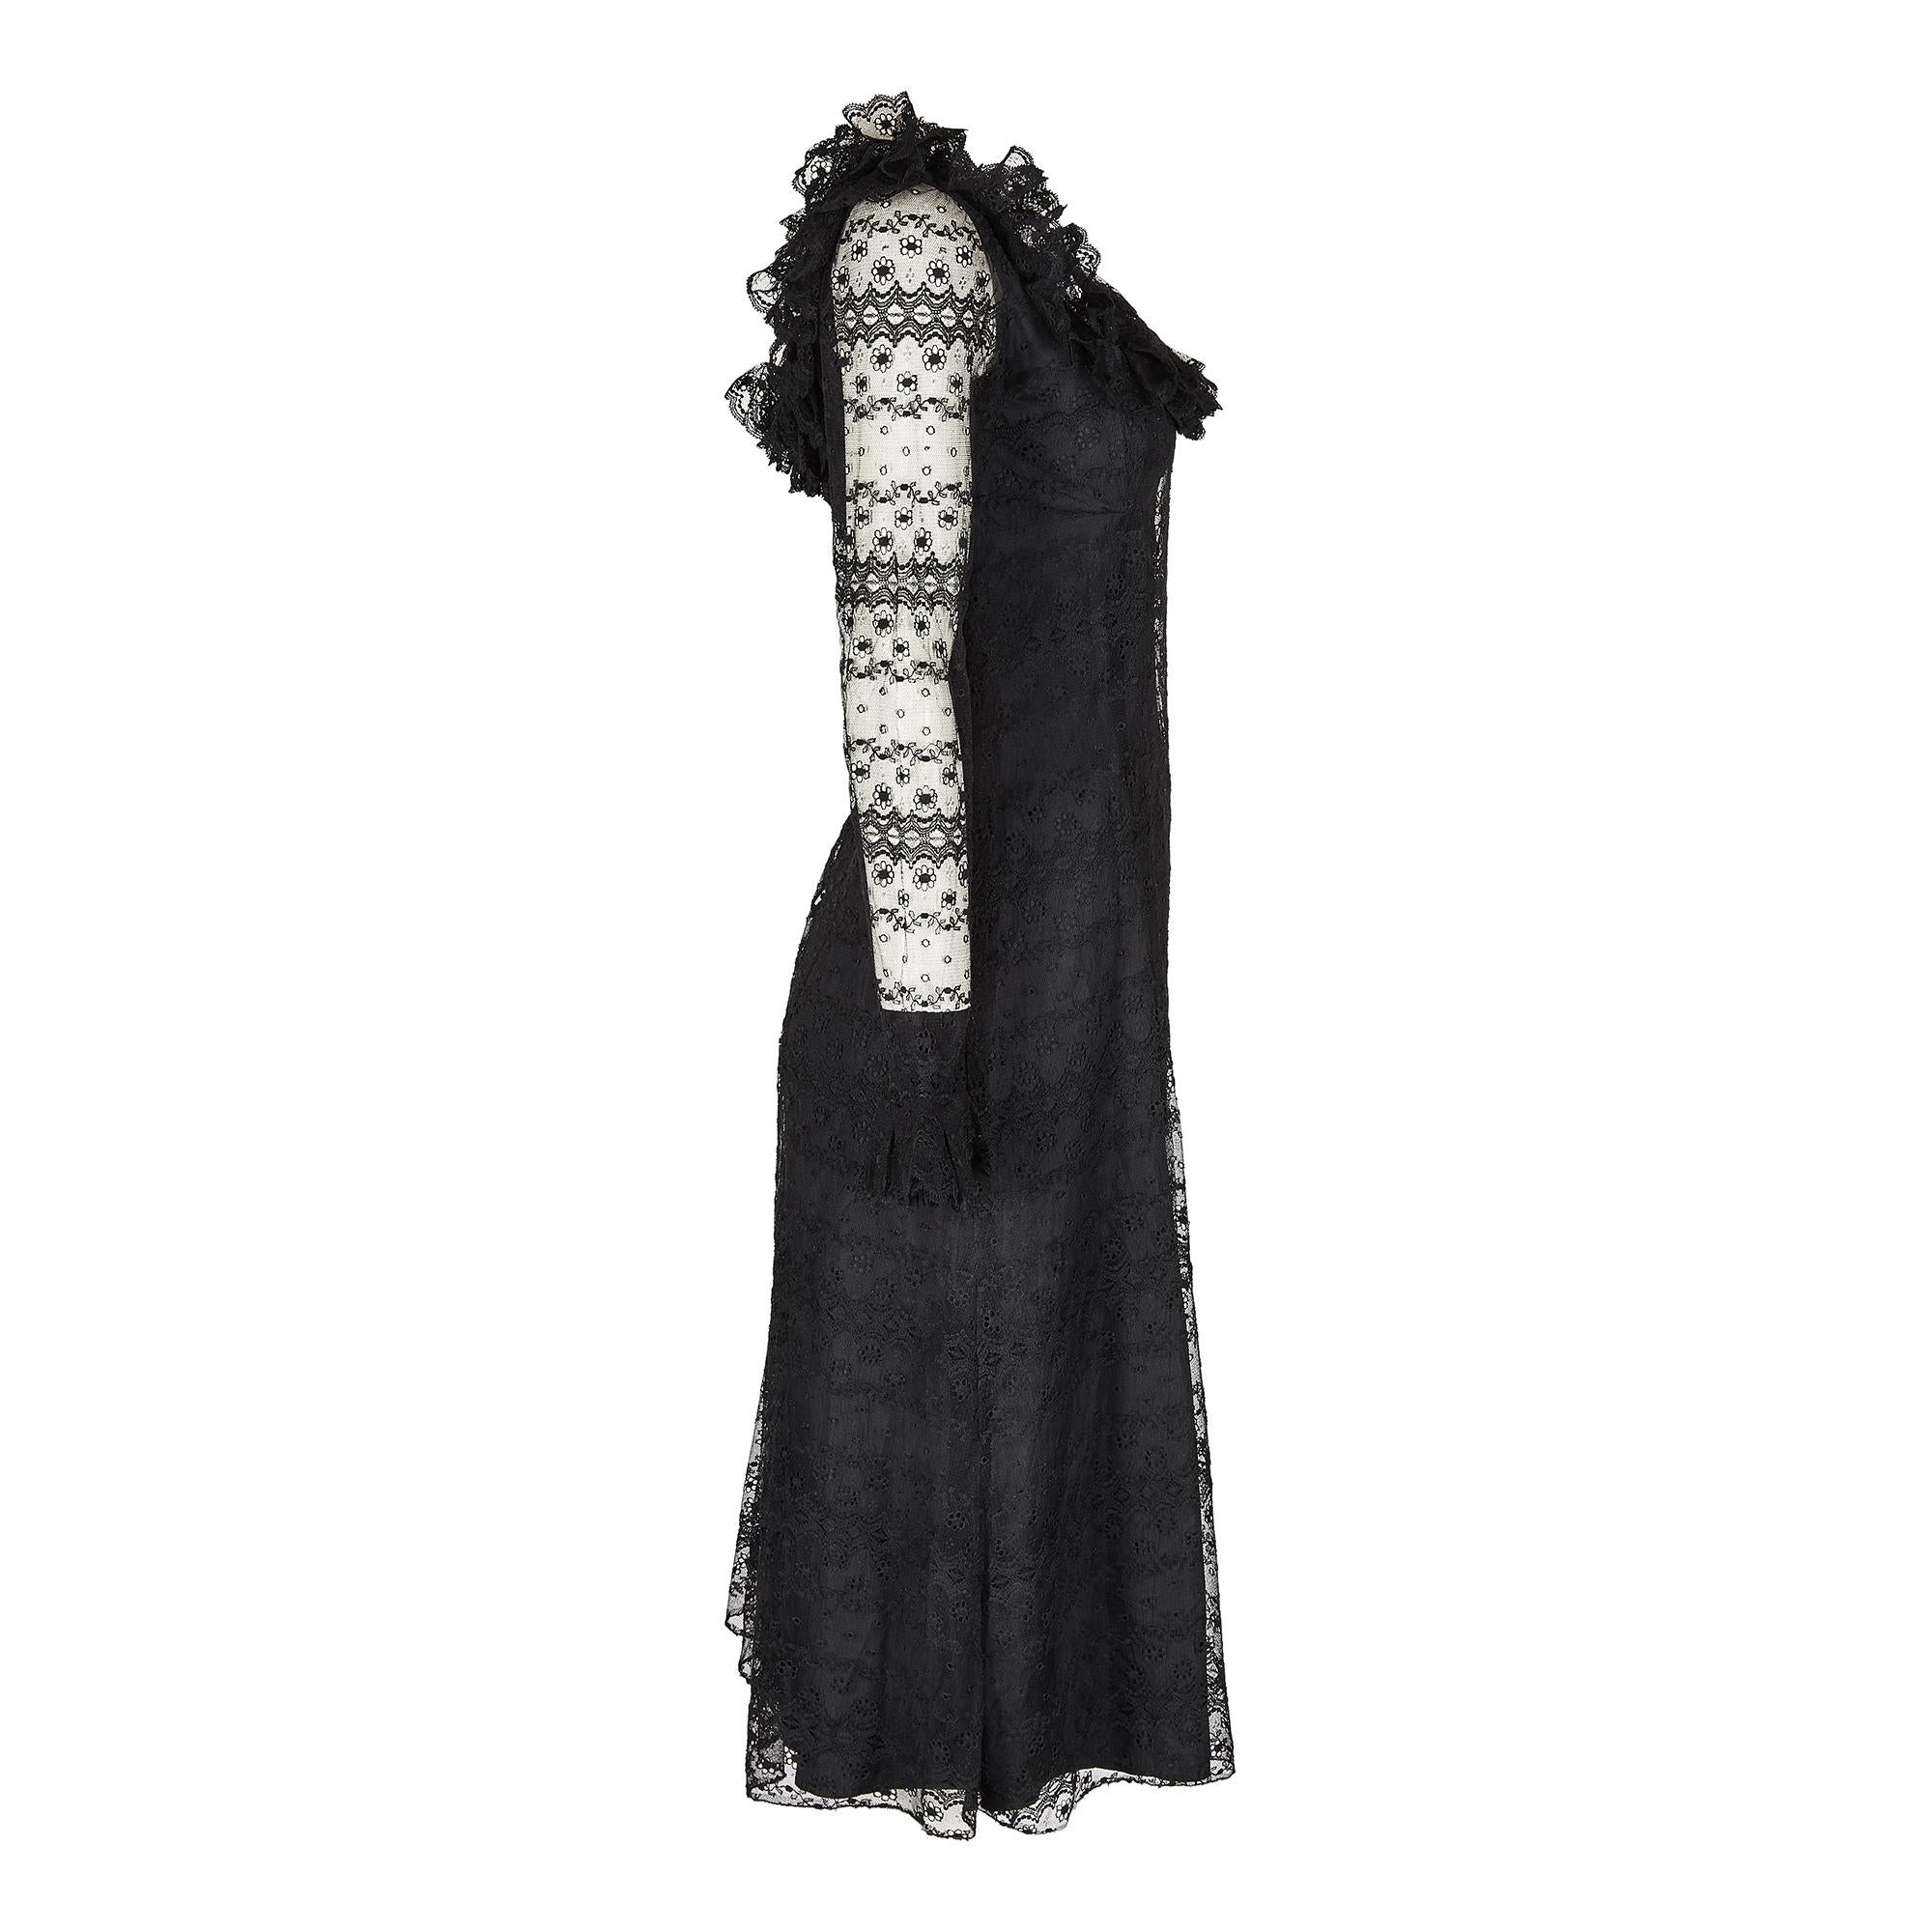 1971 Documented Madame Gres Haute Couture Black Lace Dress In Excellent Condition For Sale In London, GB